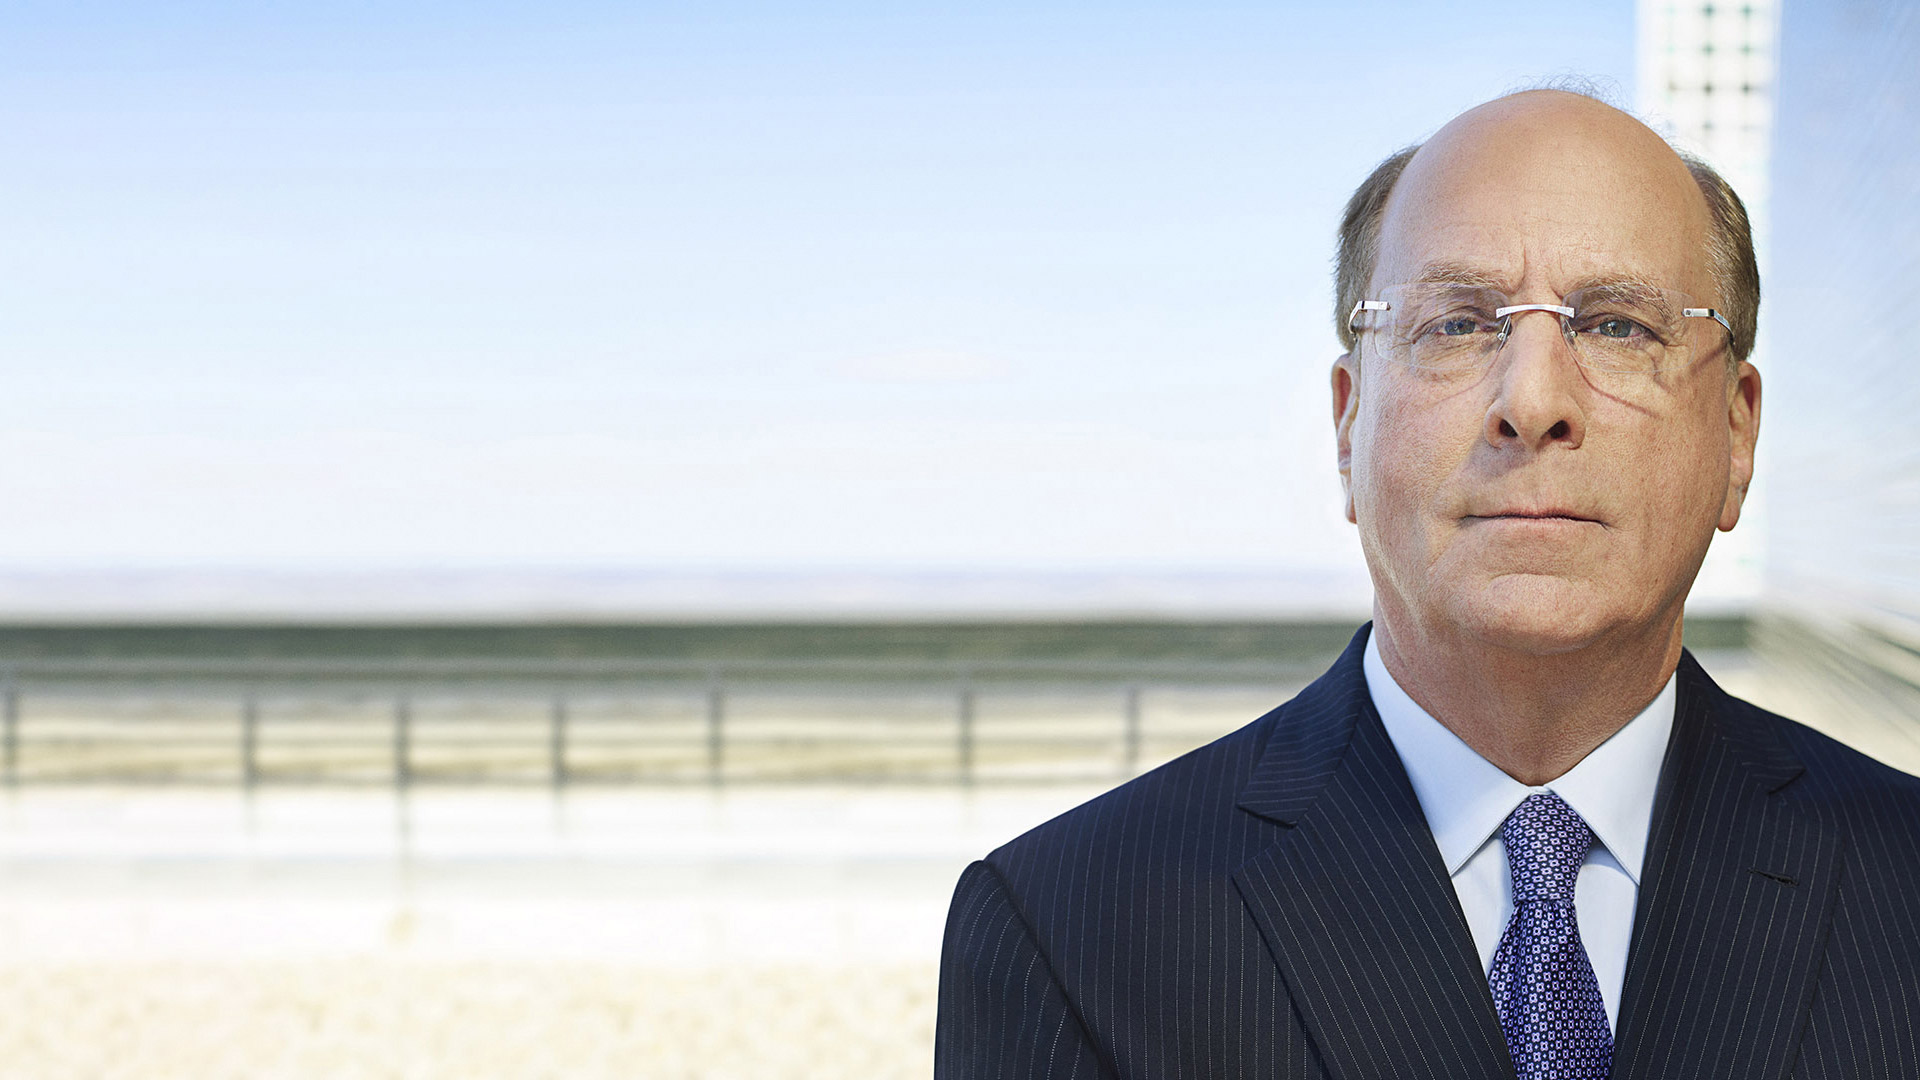 Larry Fink's annual letter to CEOs